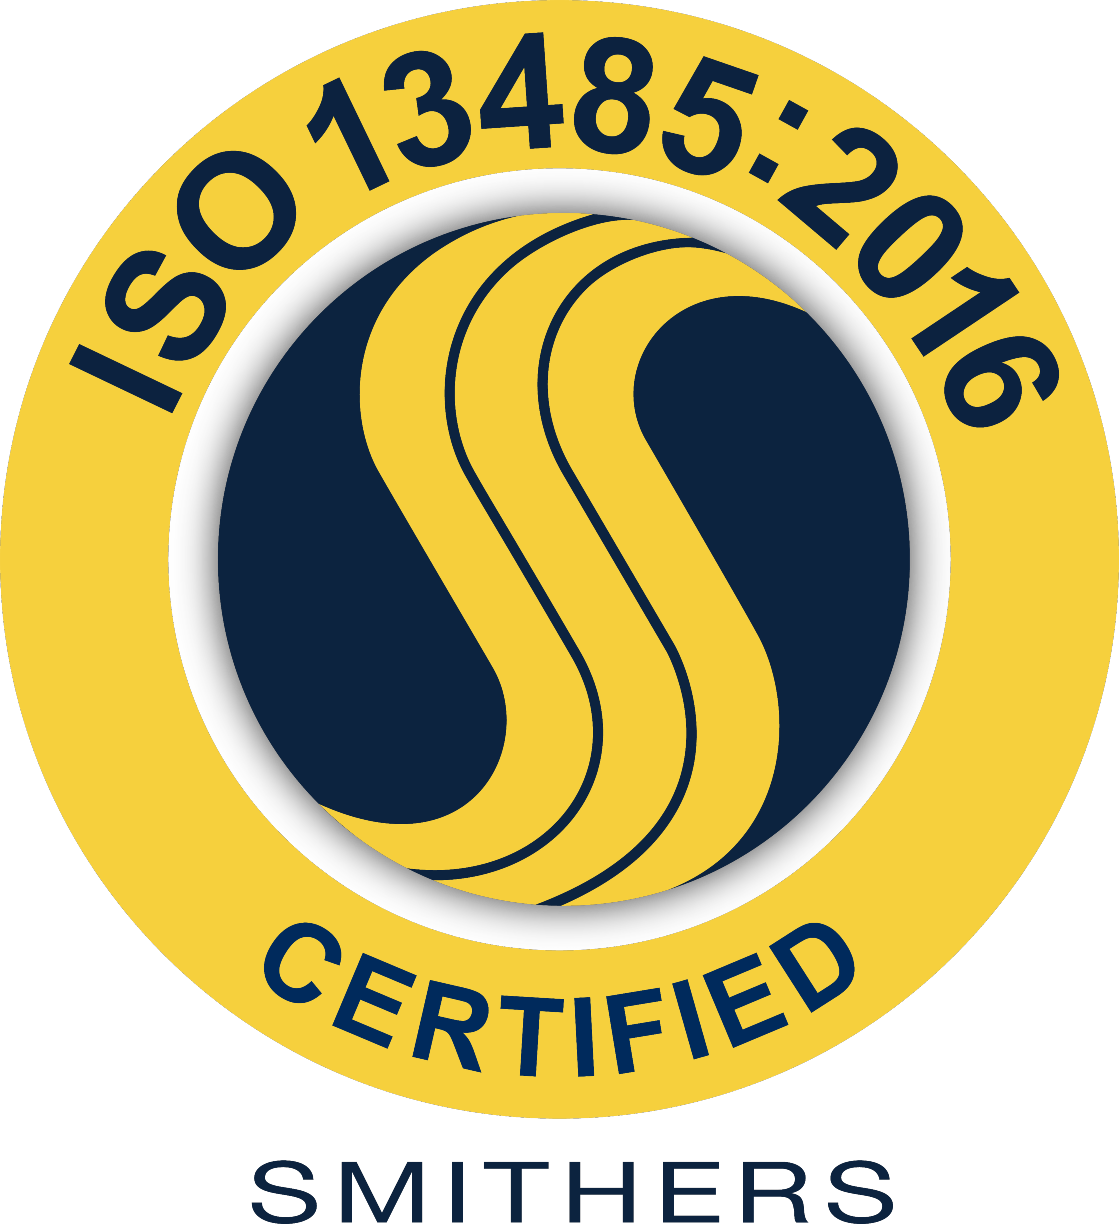 ISO 13485:2016 Certified logo shows our commitment to the safety and reliability of medical devices